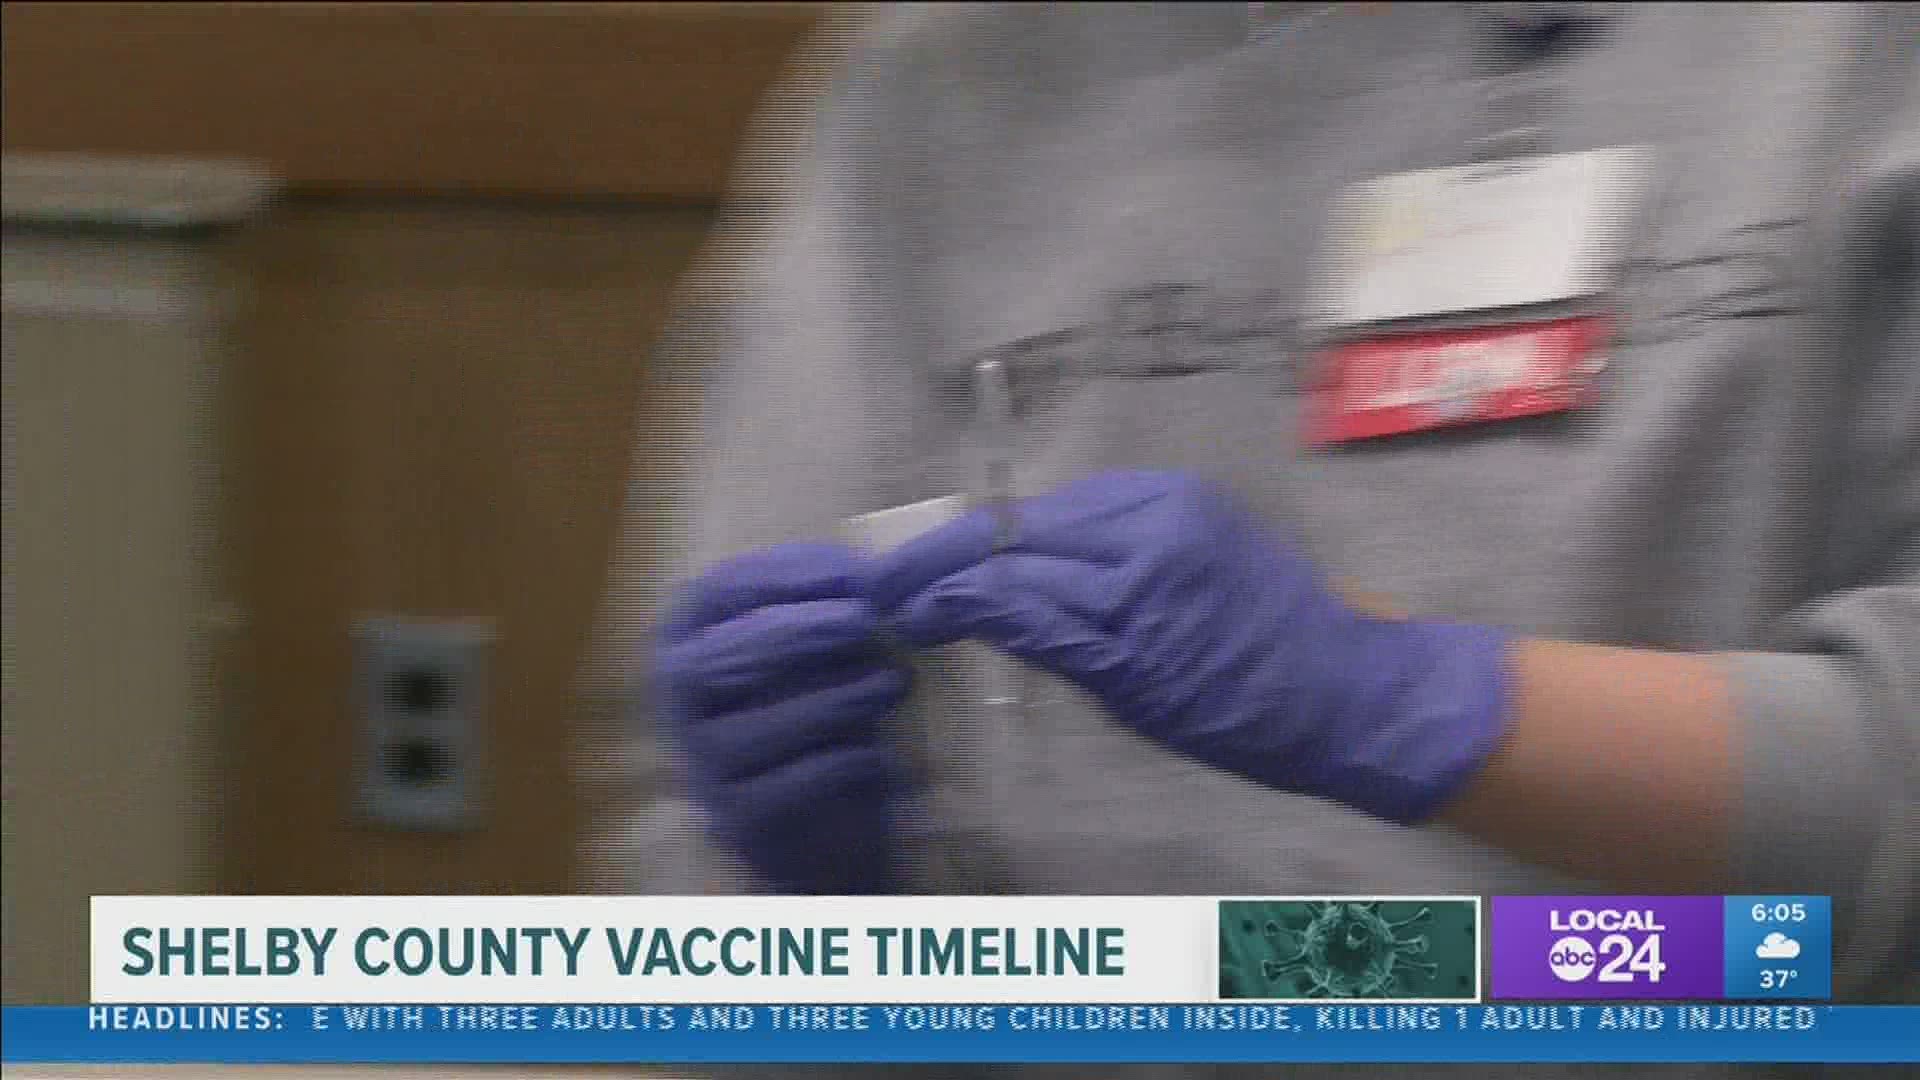 The Shelby County Health Director also outlined new timeline for the COVID-19 vaccine for first responders and those at assisted living facilities.